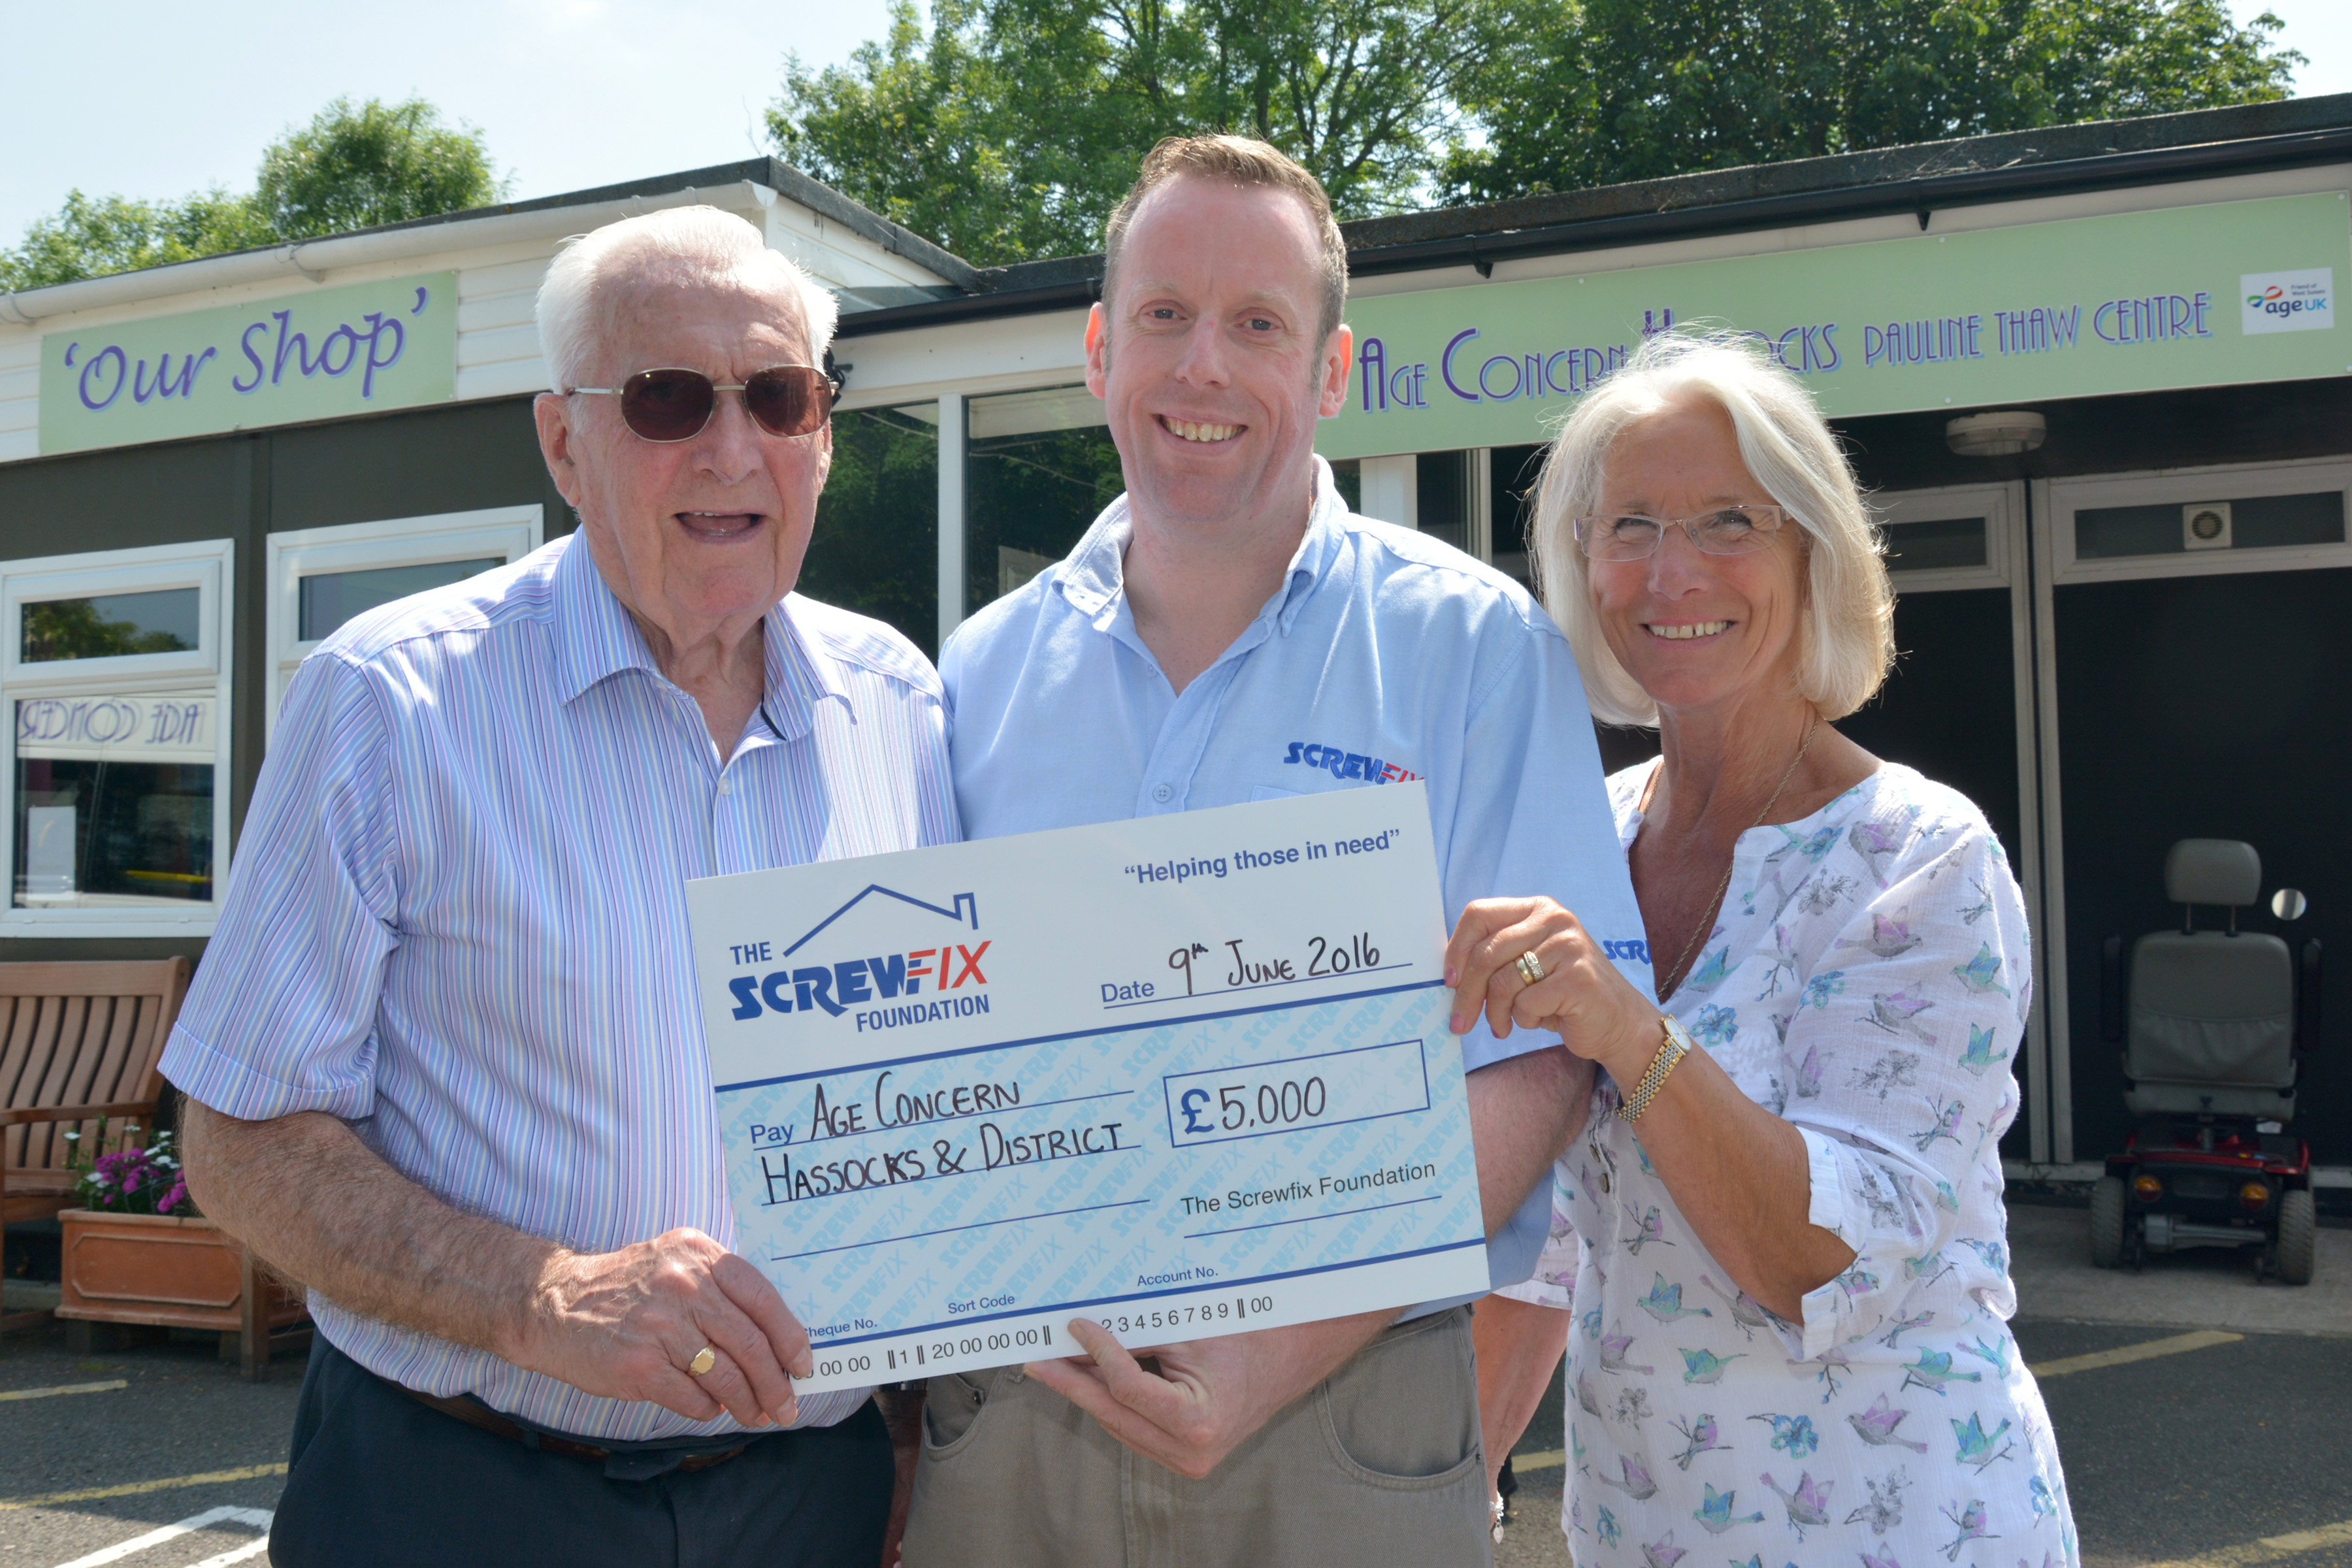 Hassocks based charity gets a helping hand from the Screwfix Foundation